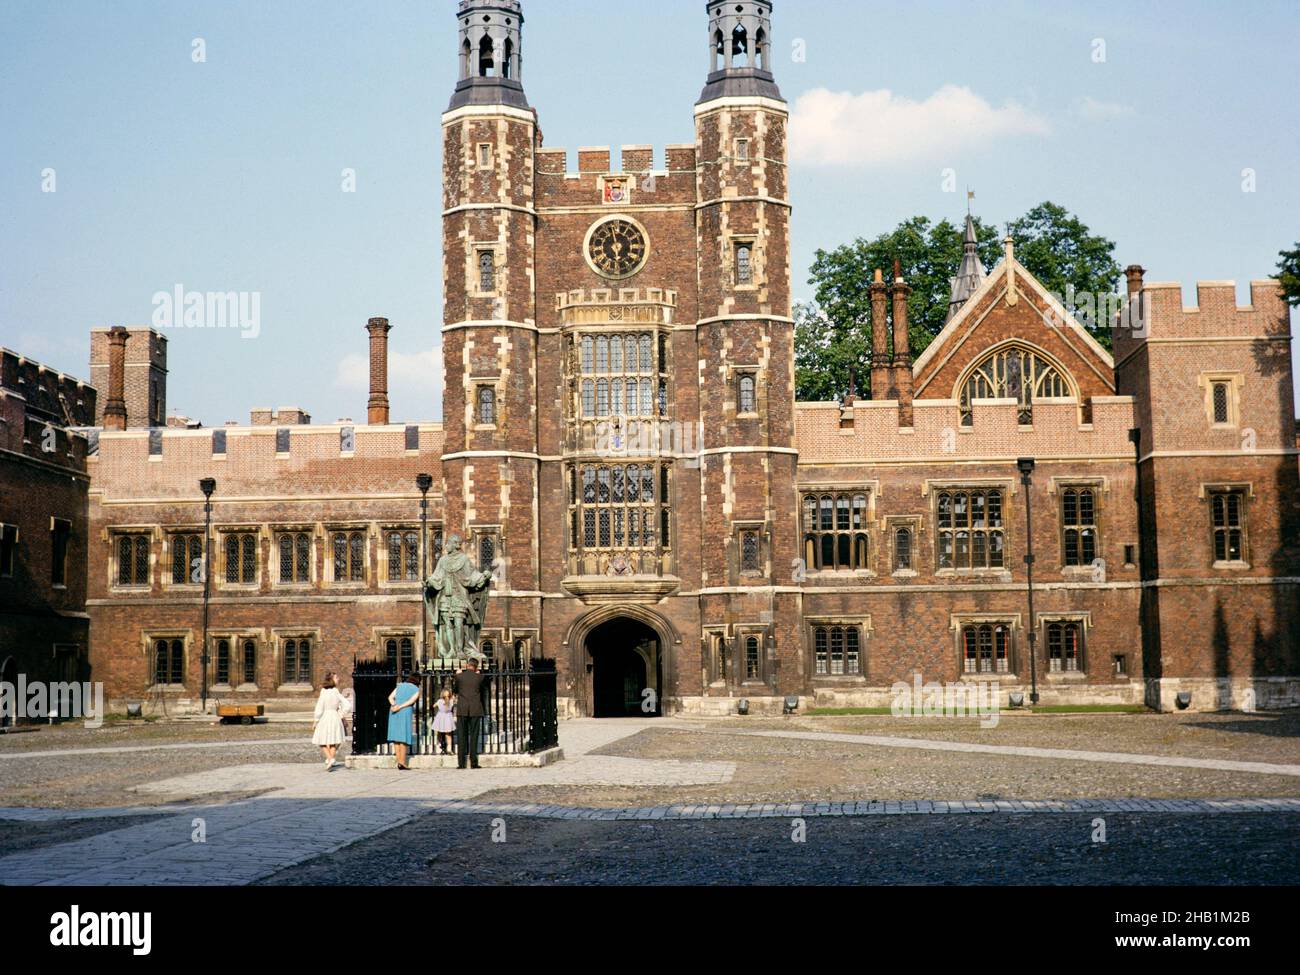 People by statue of founder King Henry VI, in School Yard courtyard, Eton College, Windsor, Berkshire, England 1963 Stock Photo